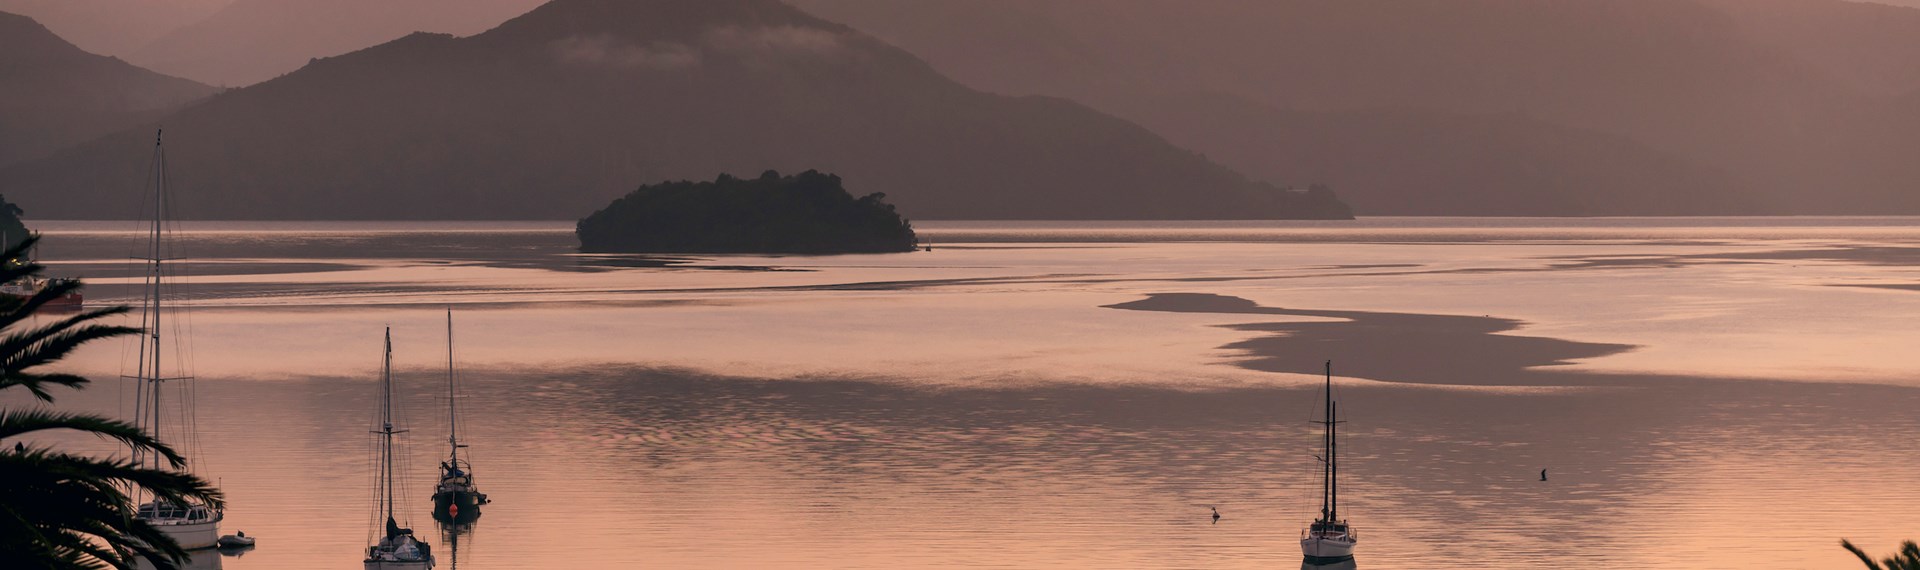 he view from Picton at sunrise over Queen Charlotte Sound/Tōtaranui, with orange skies and water in the Marlborough Sounds, New Zealand.